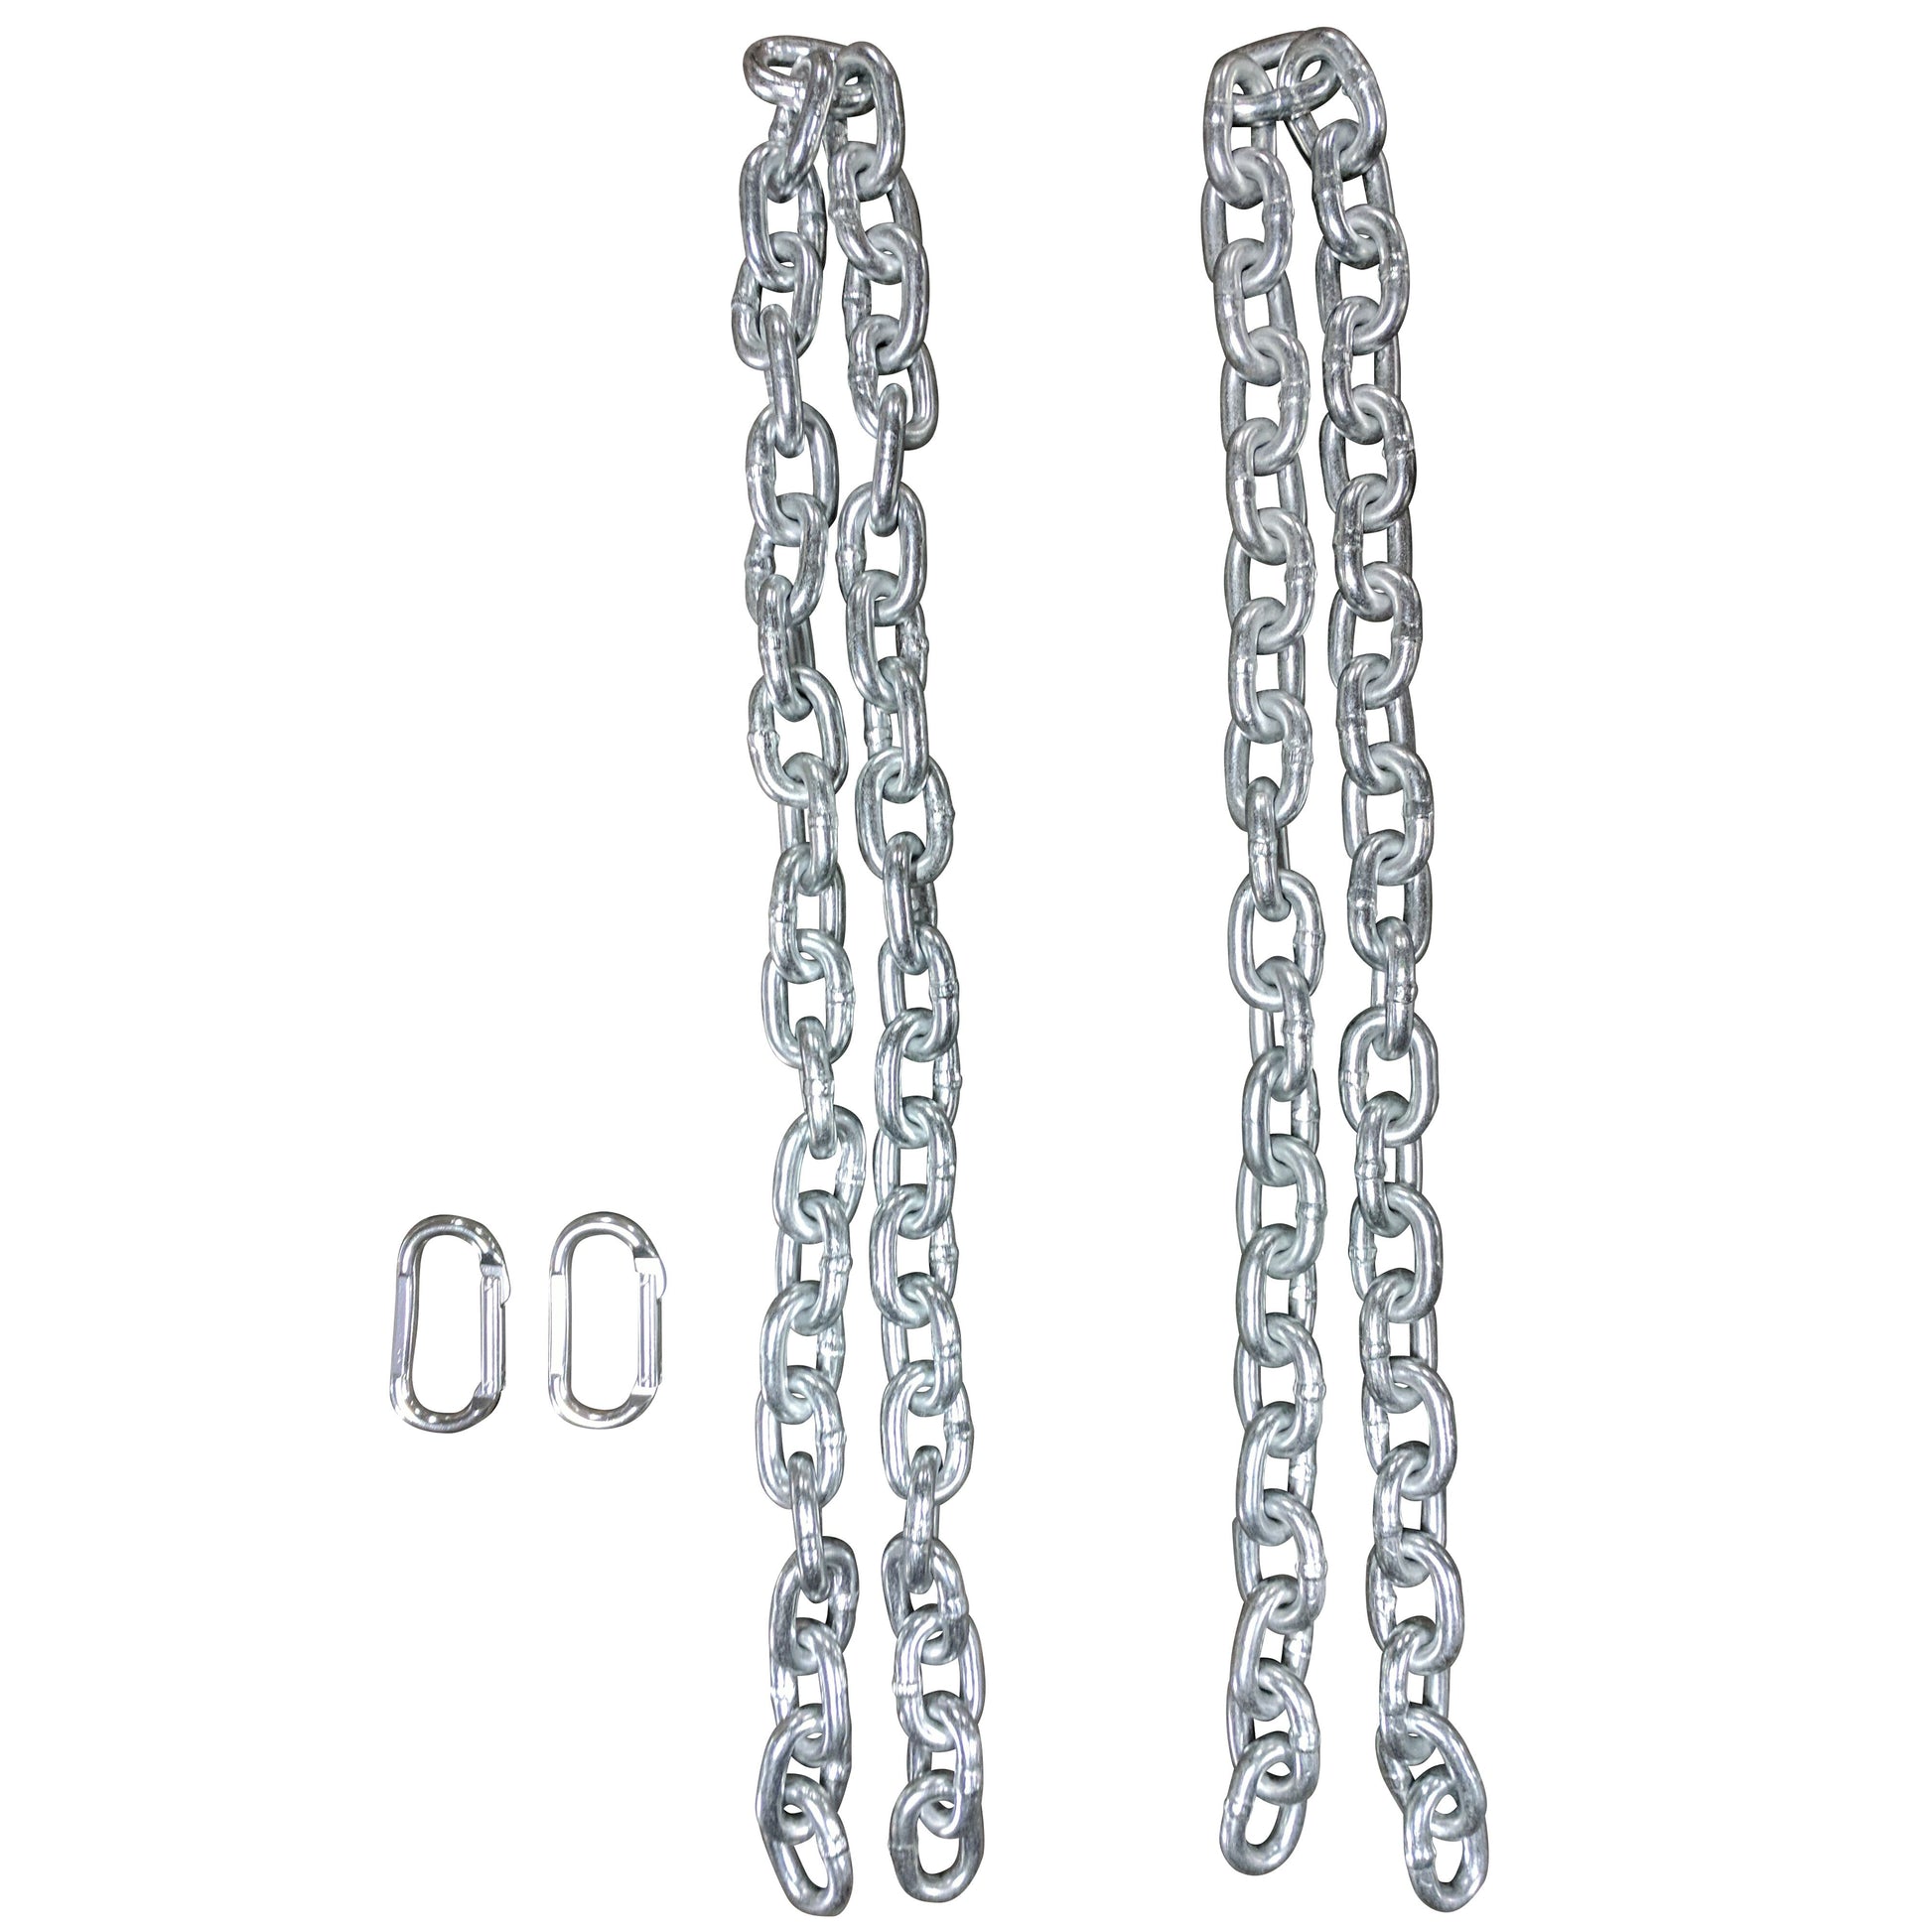 SCRATCH AND DENT - Pair of 6 ft 1/2" Weight Chains w/ Carabiner - FINAL SALE